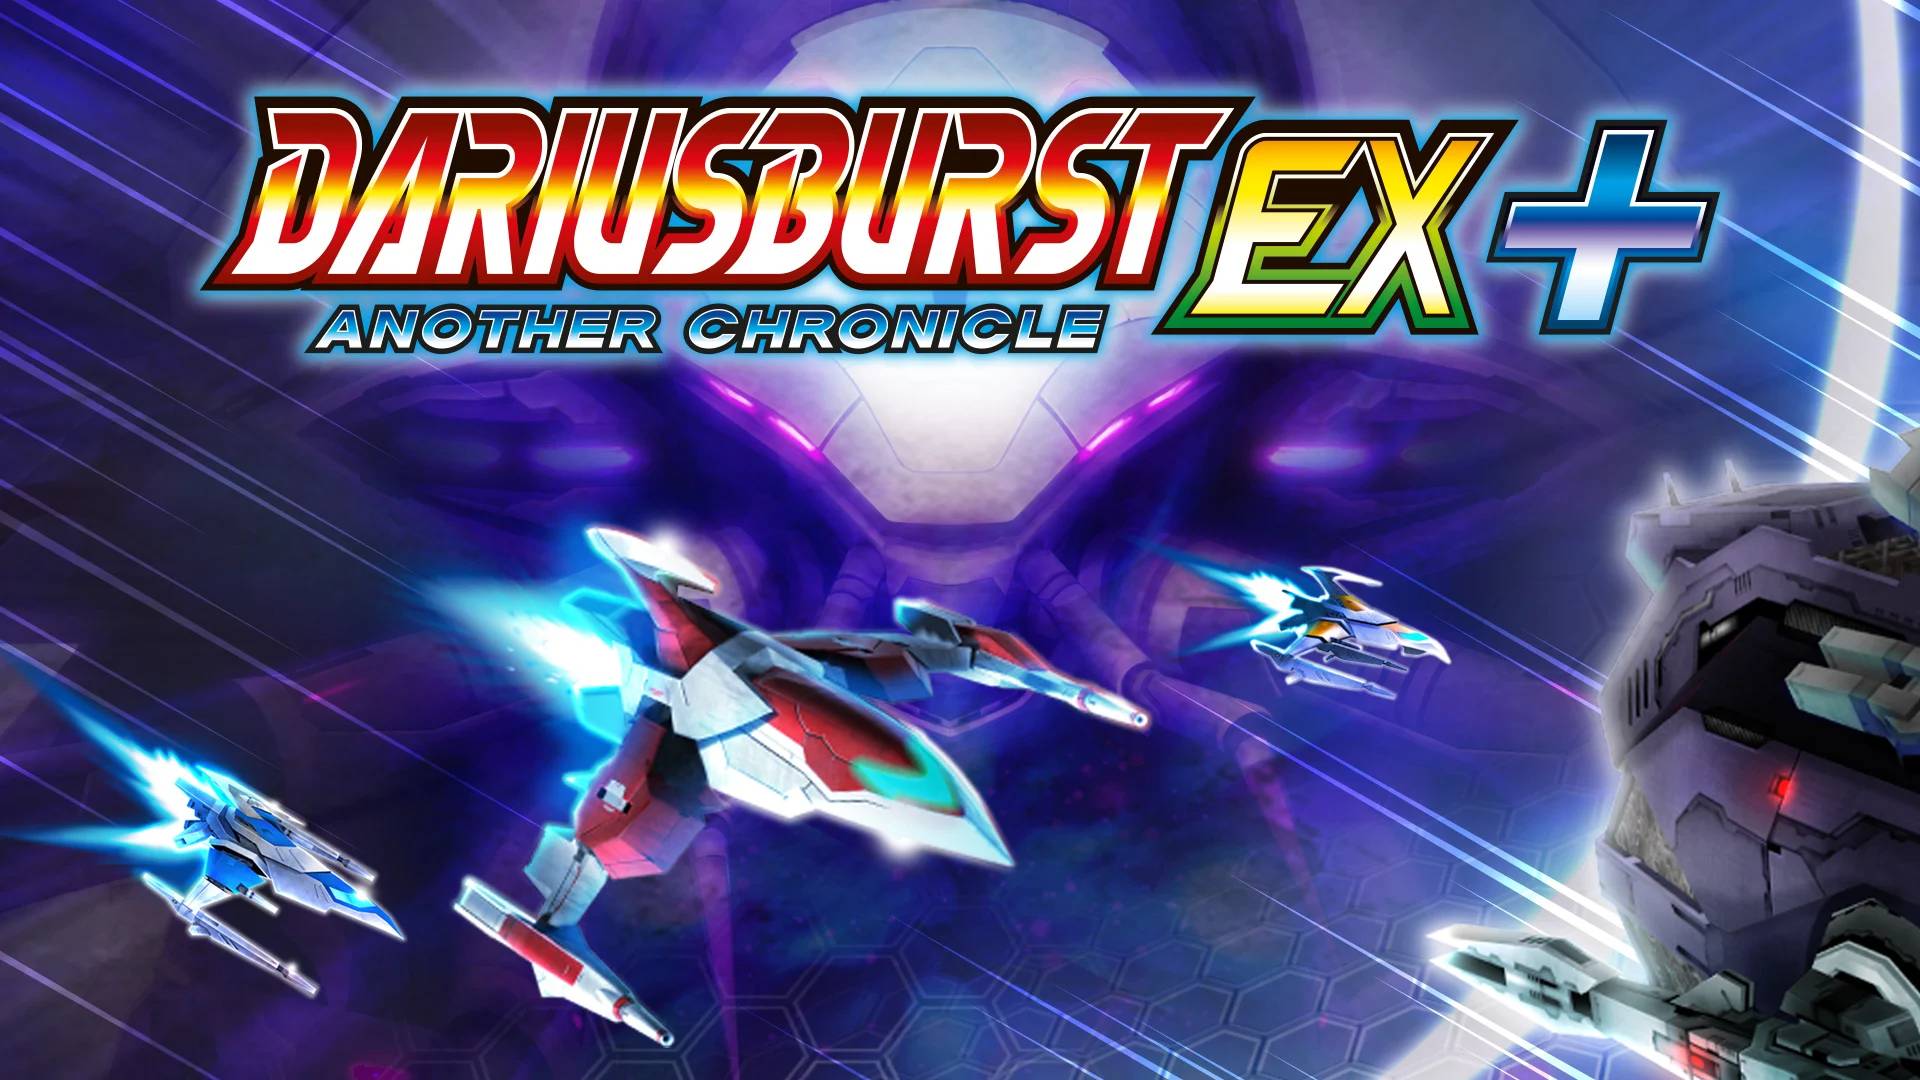 Taito’s DariusBurst Another Chronicle EX+Shoots Its Way Into Stores Today